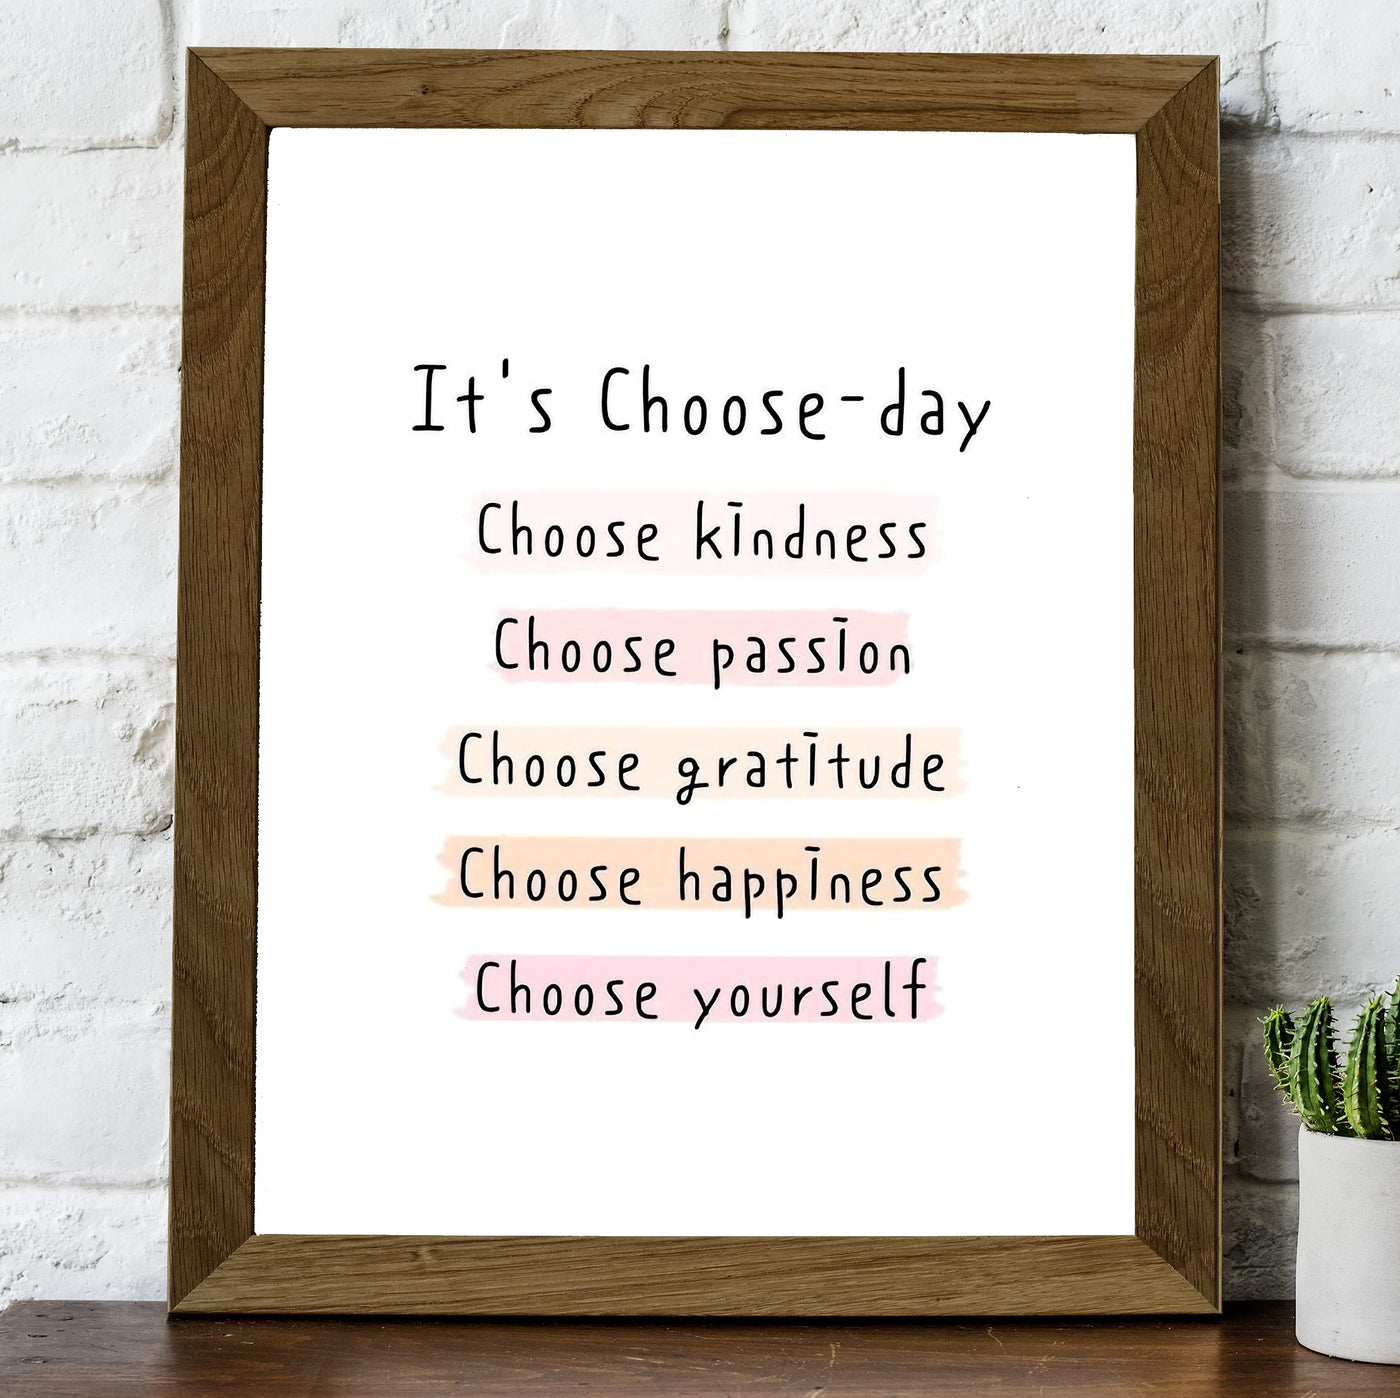 It's Choose-Day: Choose Kindness-Passion-Gratitude- Inspirational Wall Art Sign -8x10" Typographic Art Print -Ready to Frame. Motivational Home-Office-Classroom Decor. Great Gift for Inspiration!